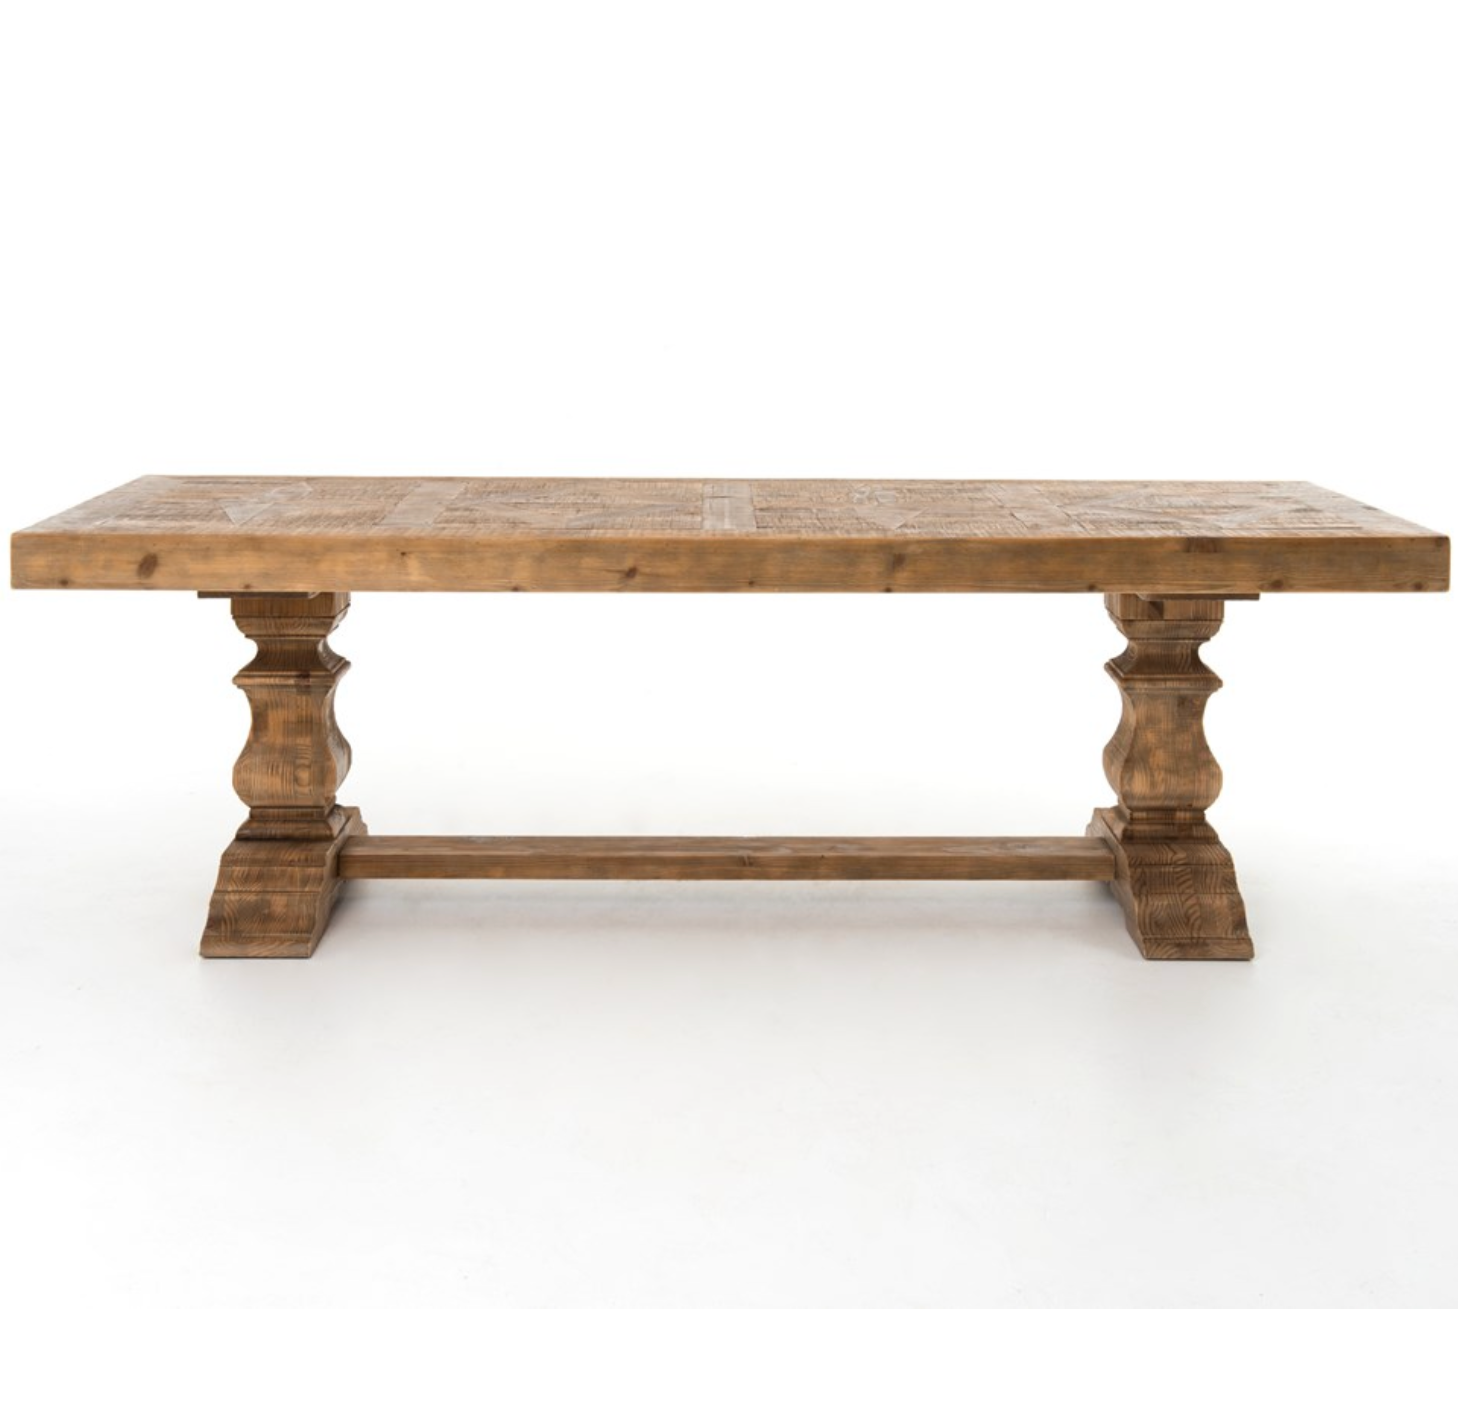 Castle 98" Dining Table - Waxed Bleached Pin